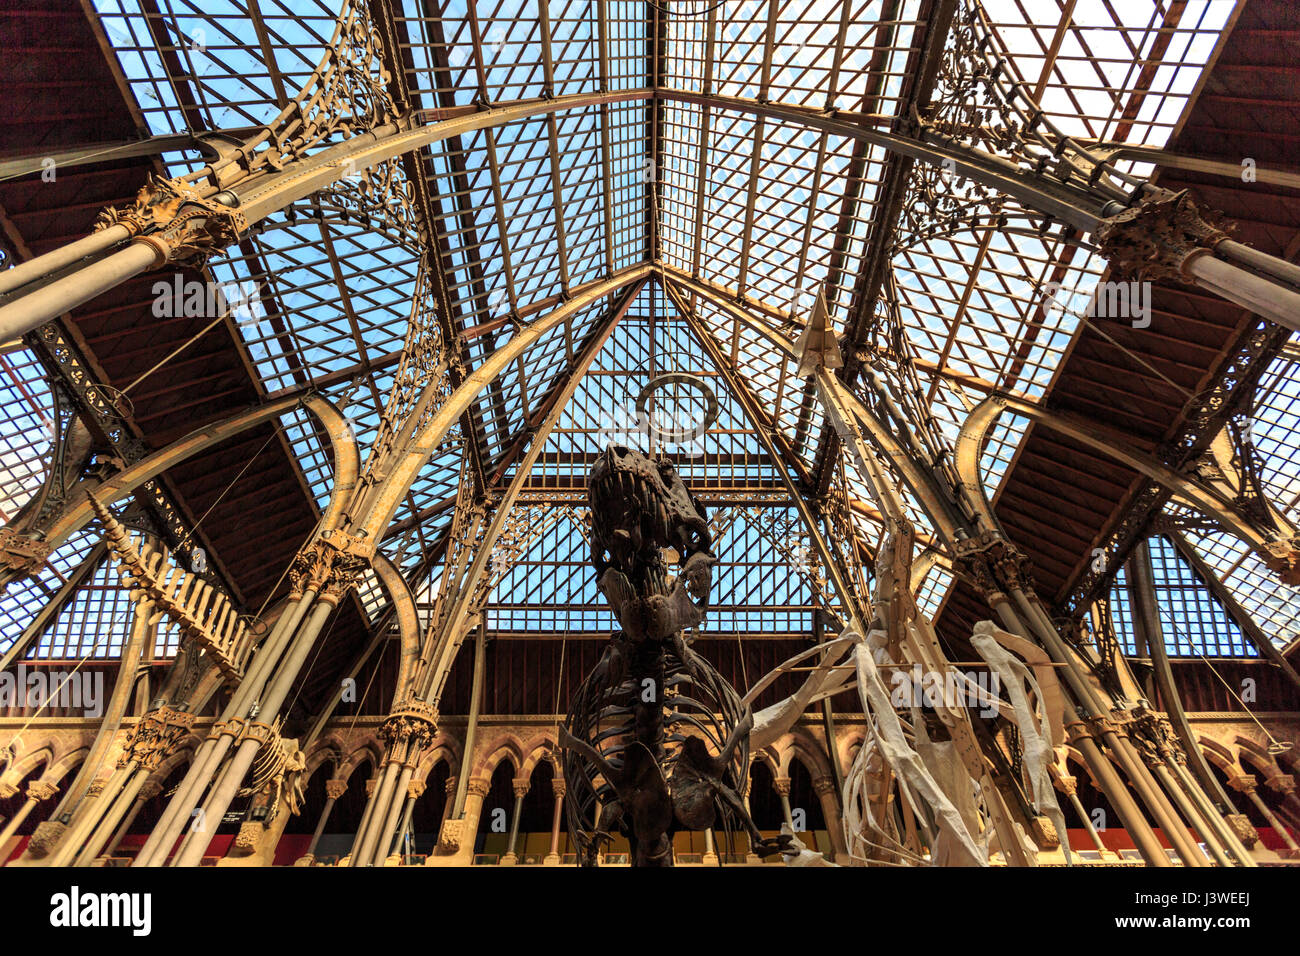 Interior exhibits and metal structure of the Natural History Museum, Oxford, England Stock Photo